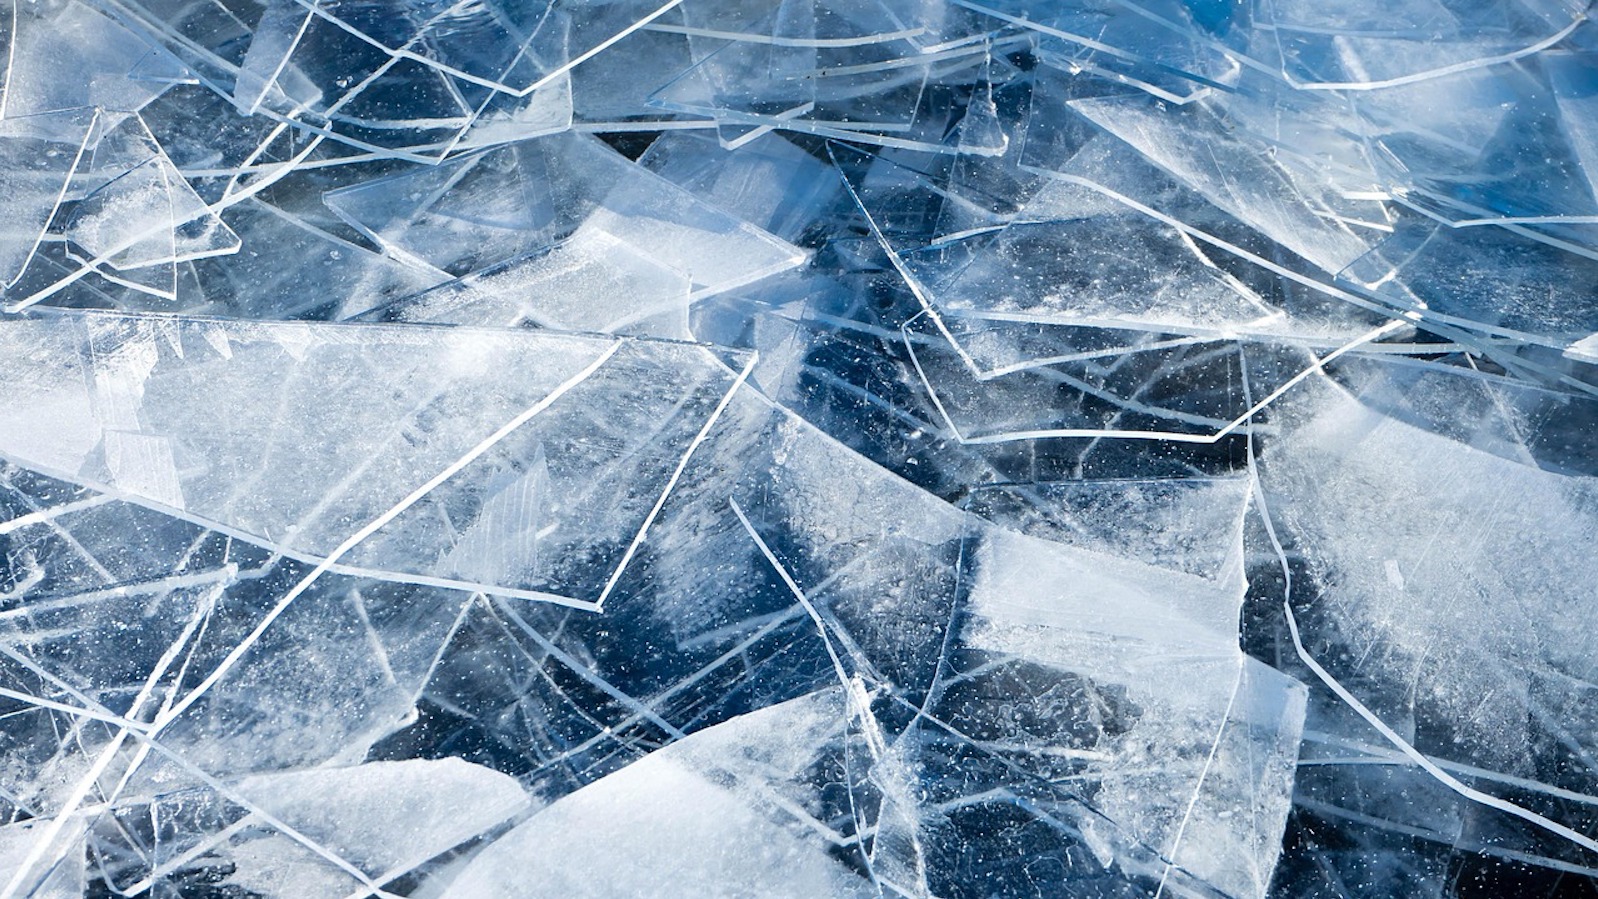 Pieces of ice frozen on a body of water and broken into pieces